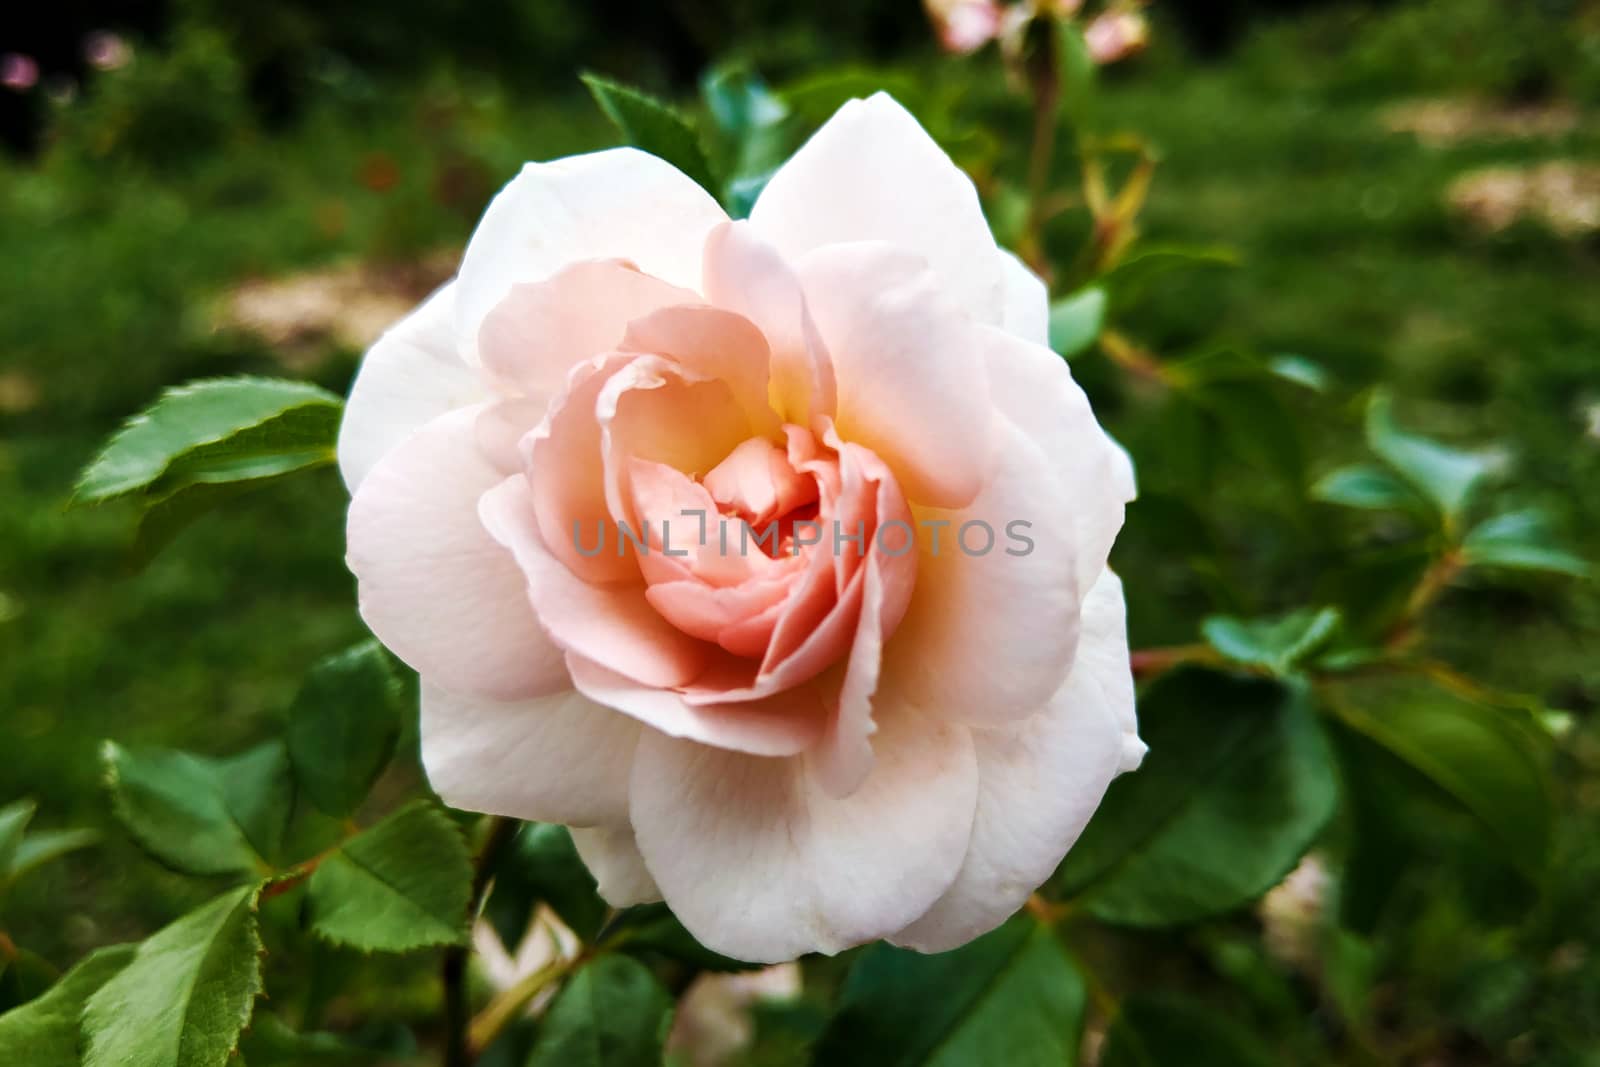 Coral rose flower in roses garden. Top view. Soft focus. by kip02kas